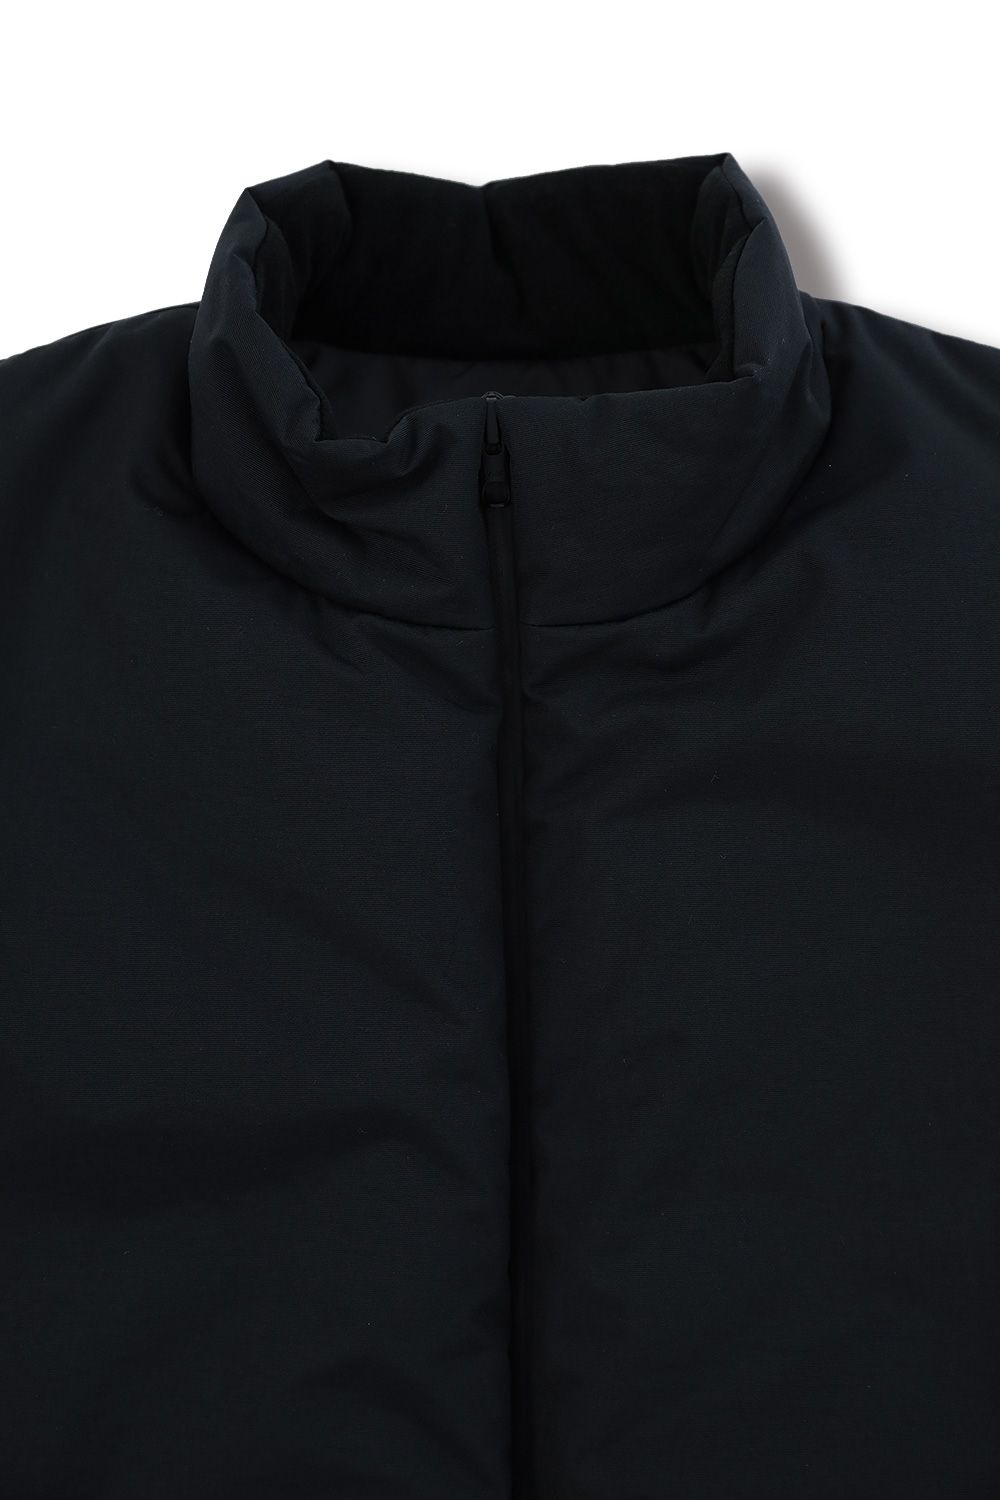 WEWILL - 【23AW】SOLID PUFFER JACKET(BLACK) | Acacia ONLINESTORE